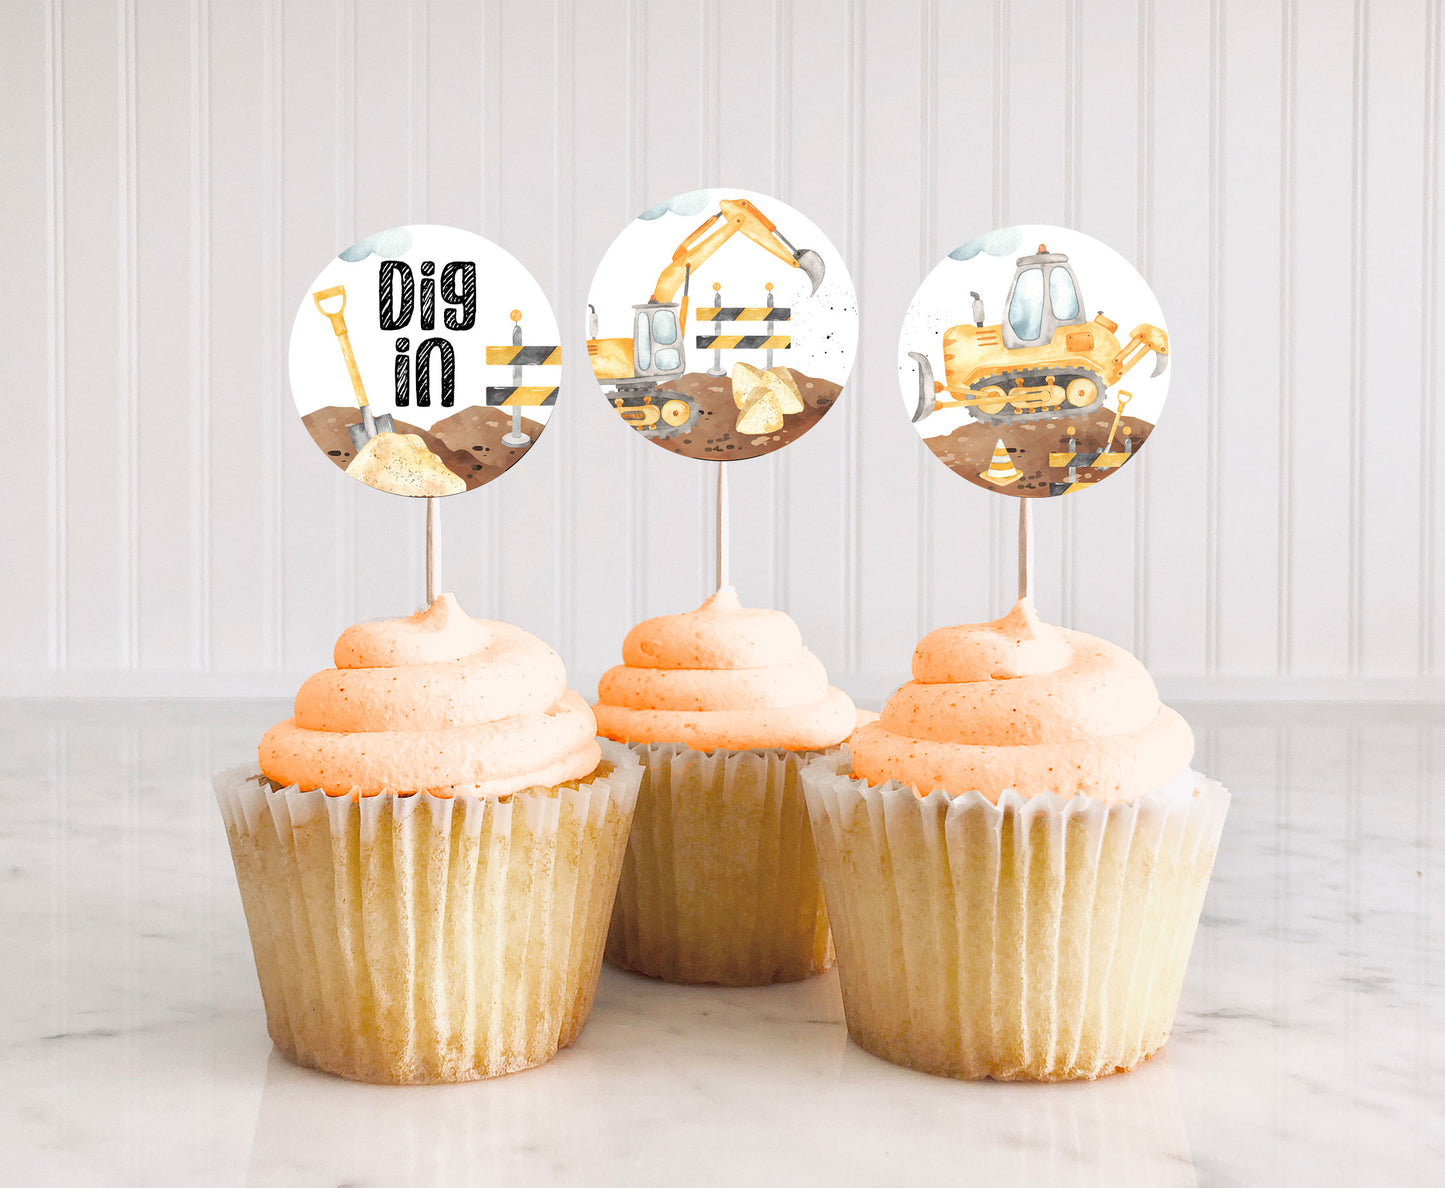 Construction Cupcake Toppers | Construction Themed Party Cupcake Picks - 07A